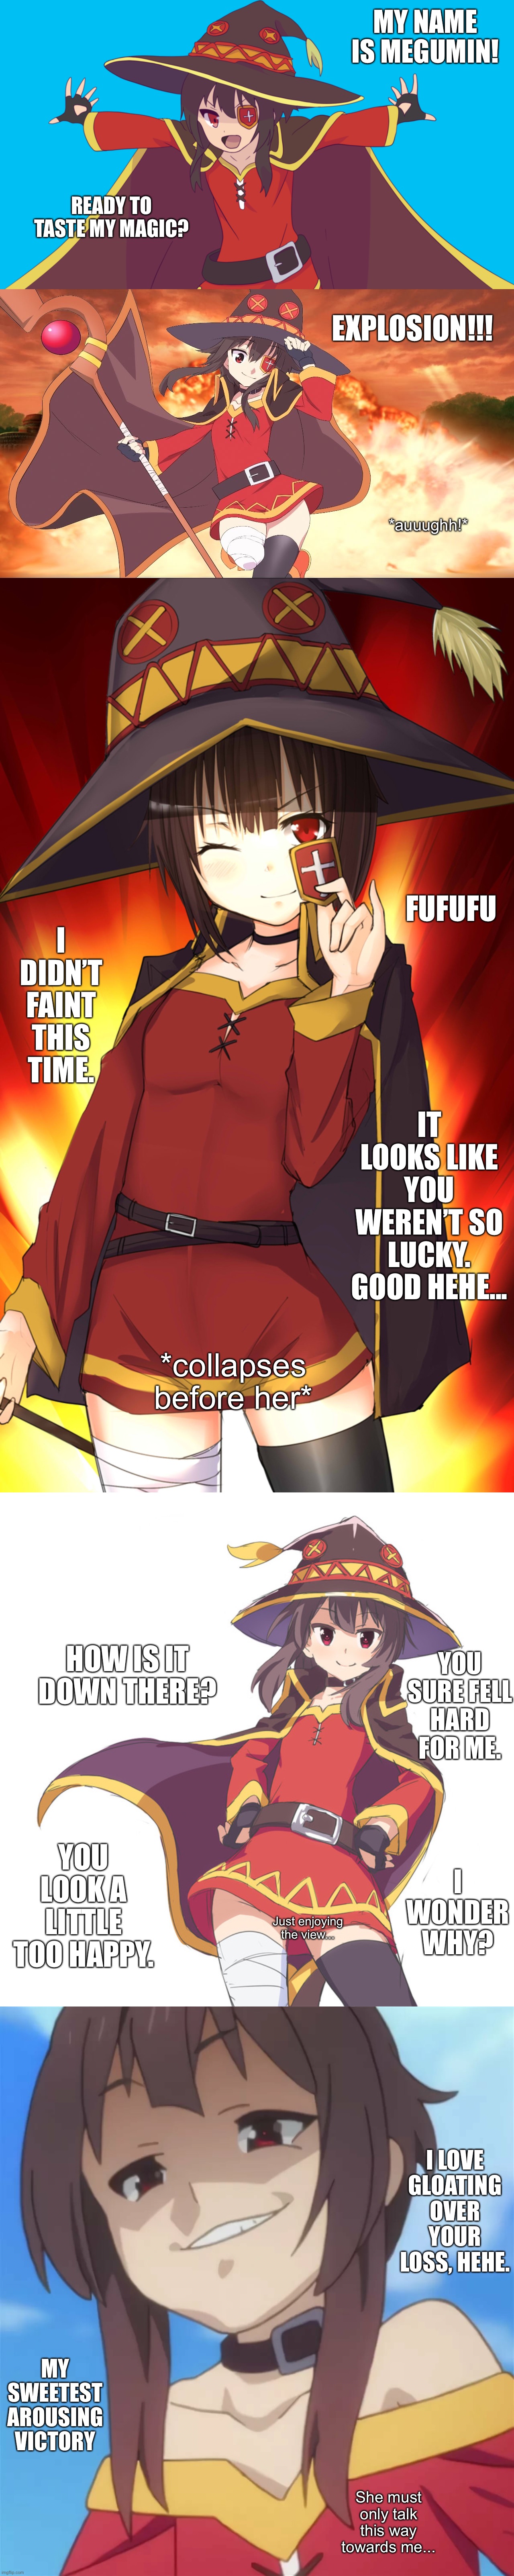 Megumin uses explosion on you. | MY NAME IS MEGUMIN! READY TO TASTE MY MAGIC? EXPLOSION!!! *auuughh!*; FUFUFU; I DIDN’T FAINT THIS TIME. IT LOOKS LIKE YOU WEREN’T SO LUCKY. GOOD HEHE... *collapses before her*; HOW IS IT DOWN THERE? YOU SURE FELL HARD FOR ME. YOU LOOK A LITTLE TOO HAPPY. I WONDER WHY? Just enjoying the view... I LOVE GLOATING OVER YOUR LOSS, HEHE. MY SWEETEST AROUSING VICTORY; She must only talk this way towards me... | image tagged in memes,funny,megumin,anime,destruction,girl | made w/ Imgflip meme maker